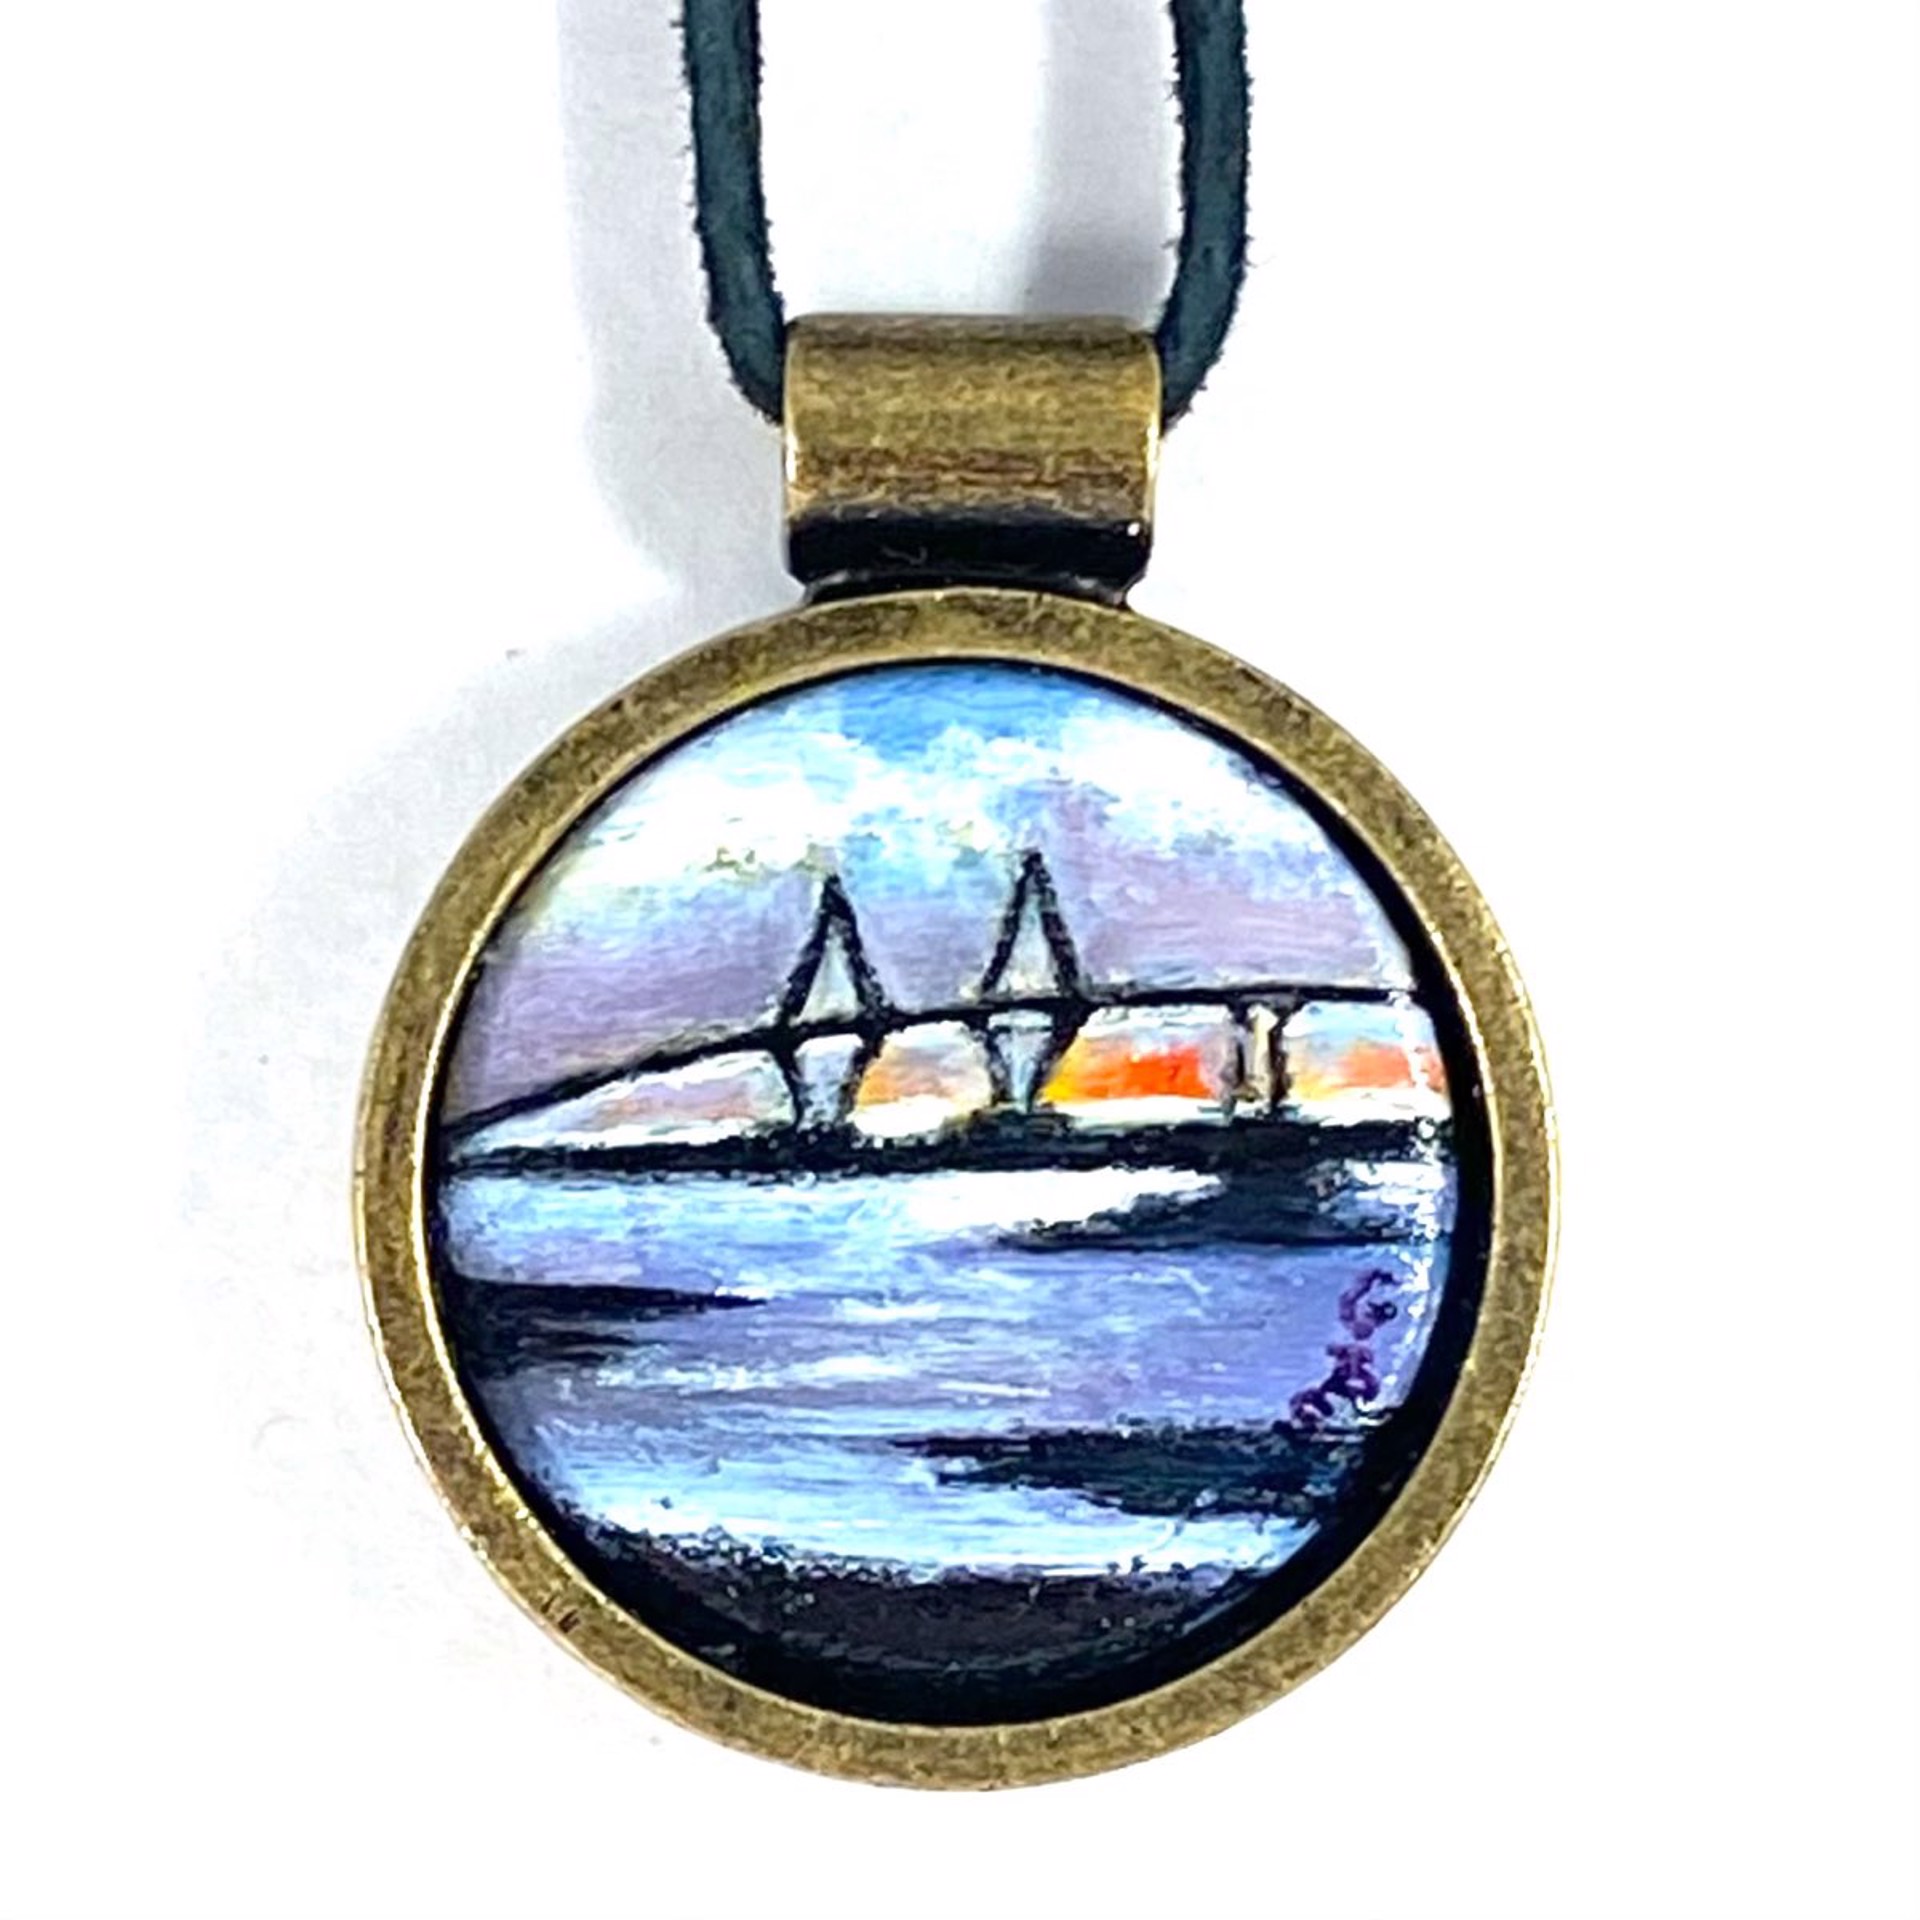 BS22-11 Ravenel Bridge at Sunset-pendent on leather by Barbara Sawyer